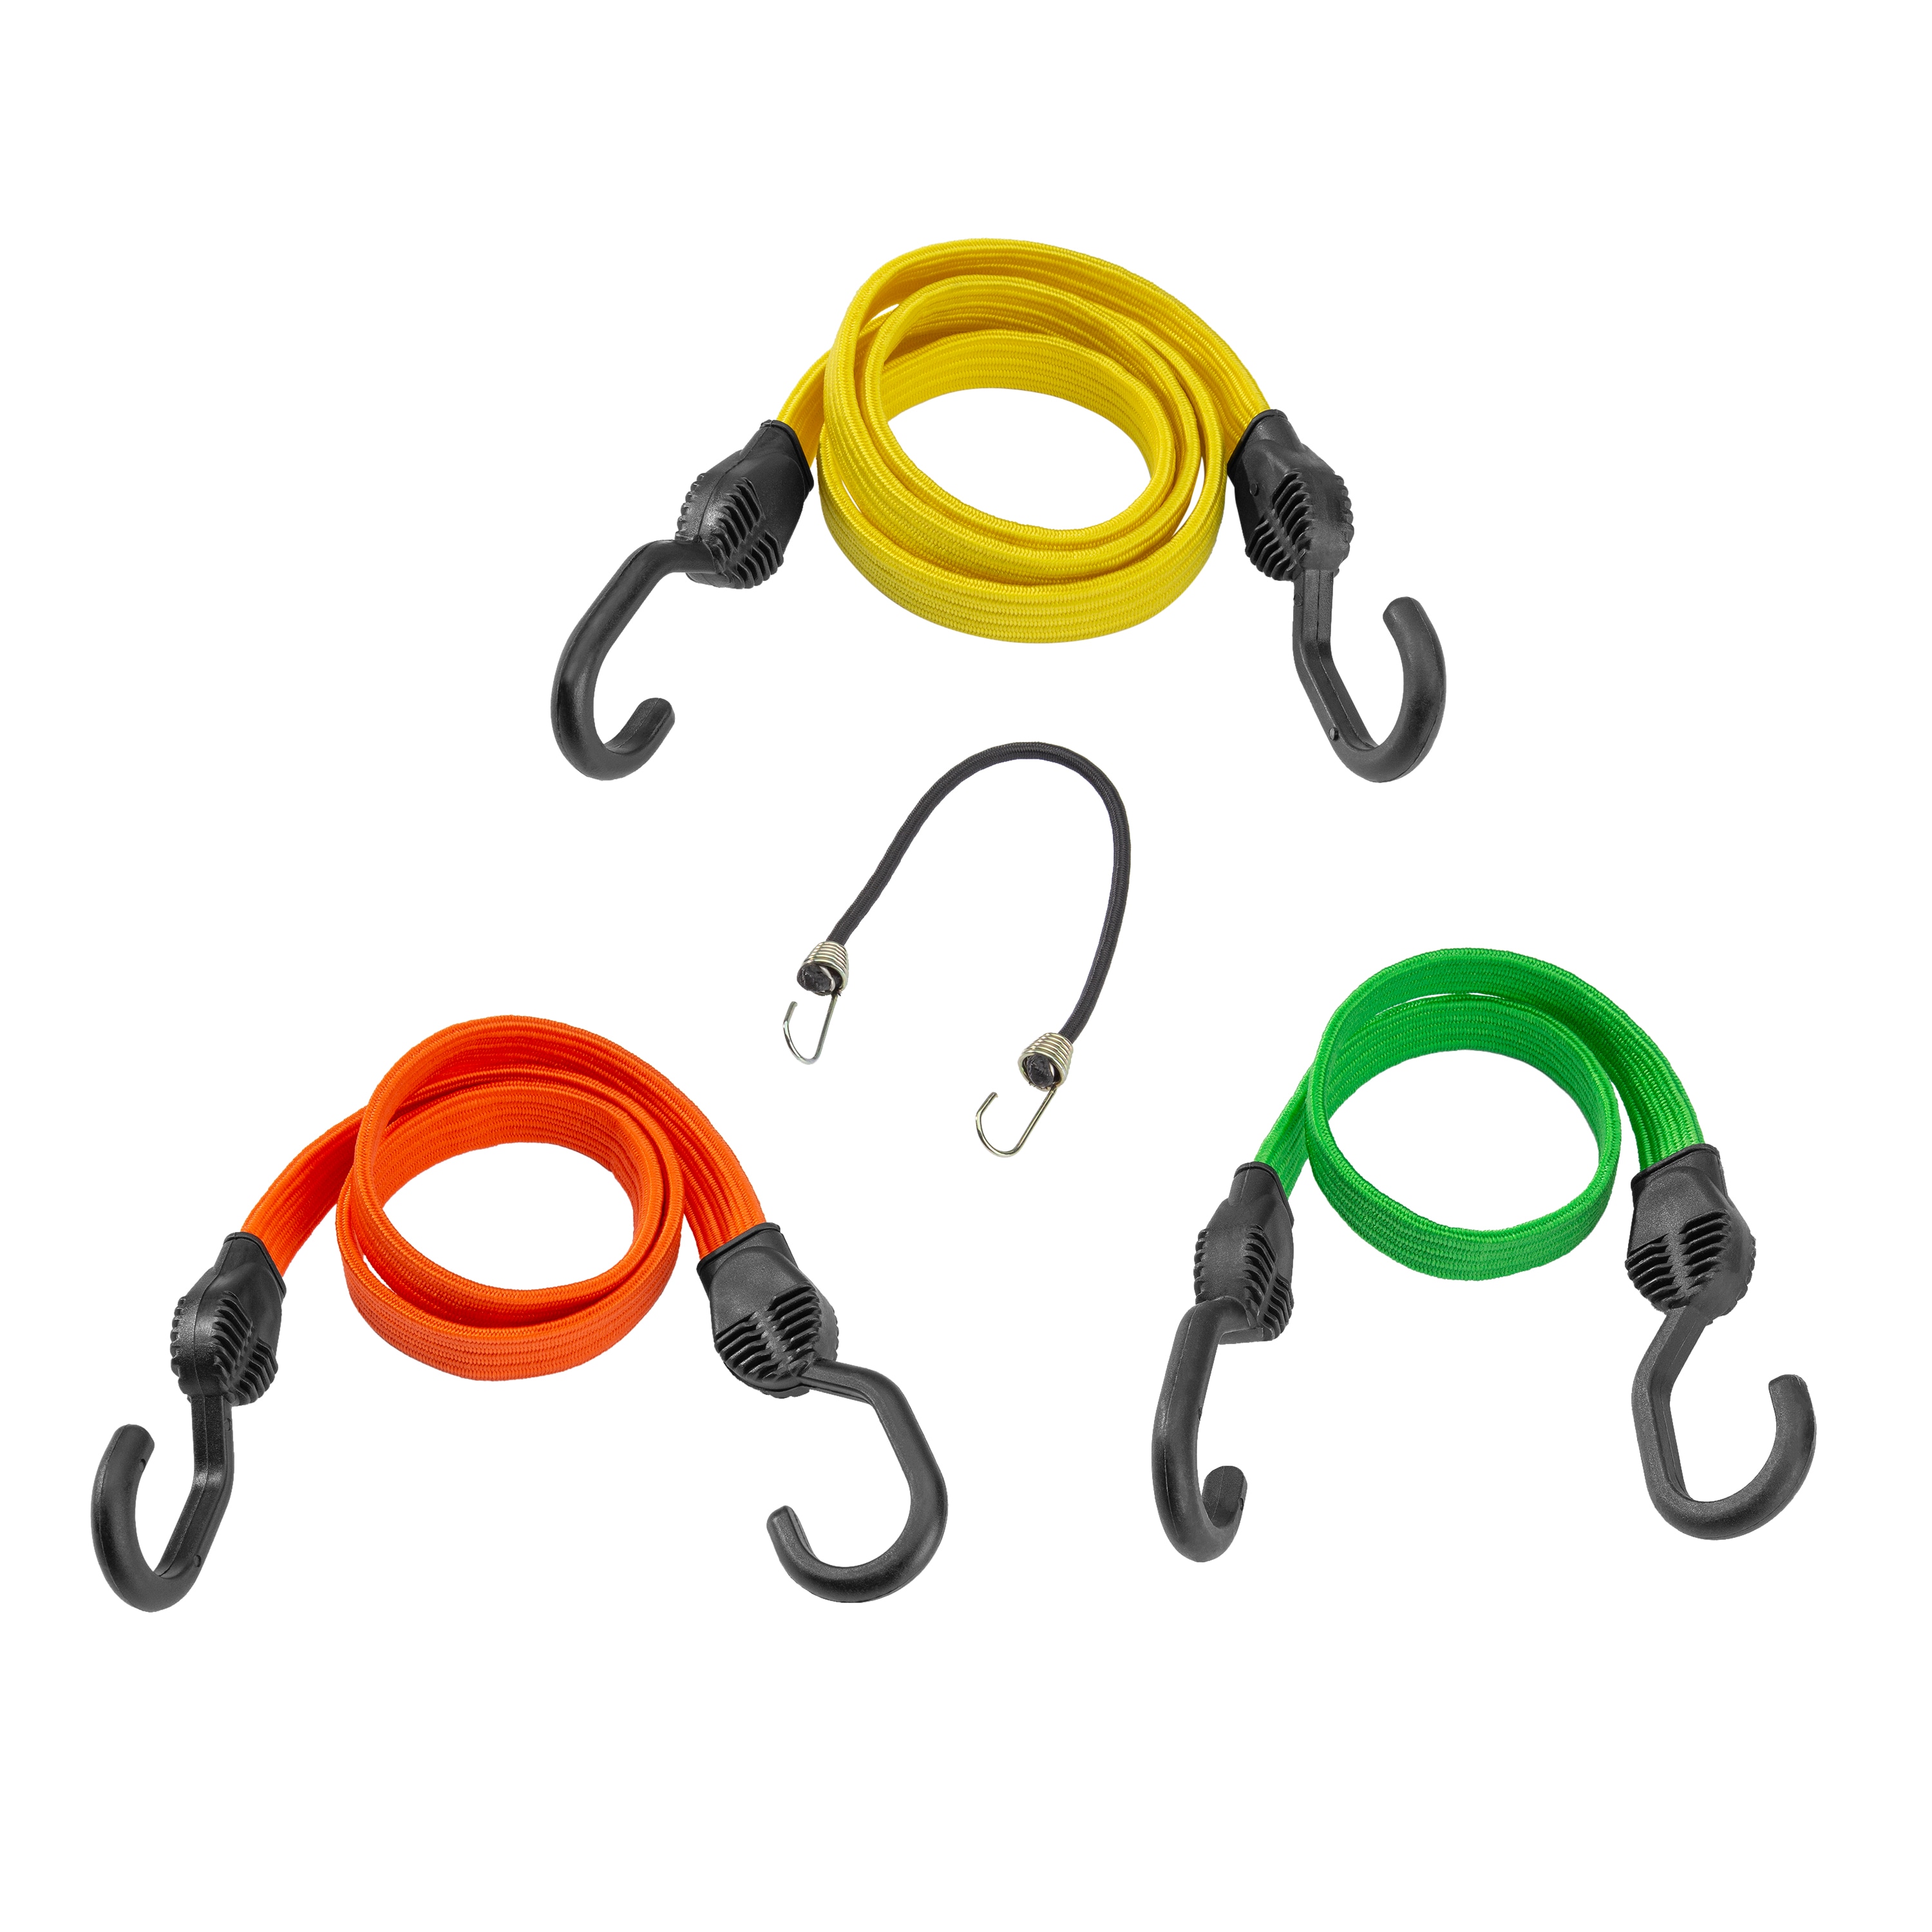 HAUL-MASTER 24 in. Carabiner Bungee Cord